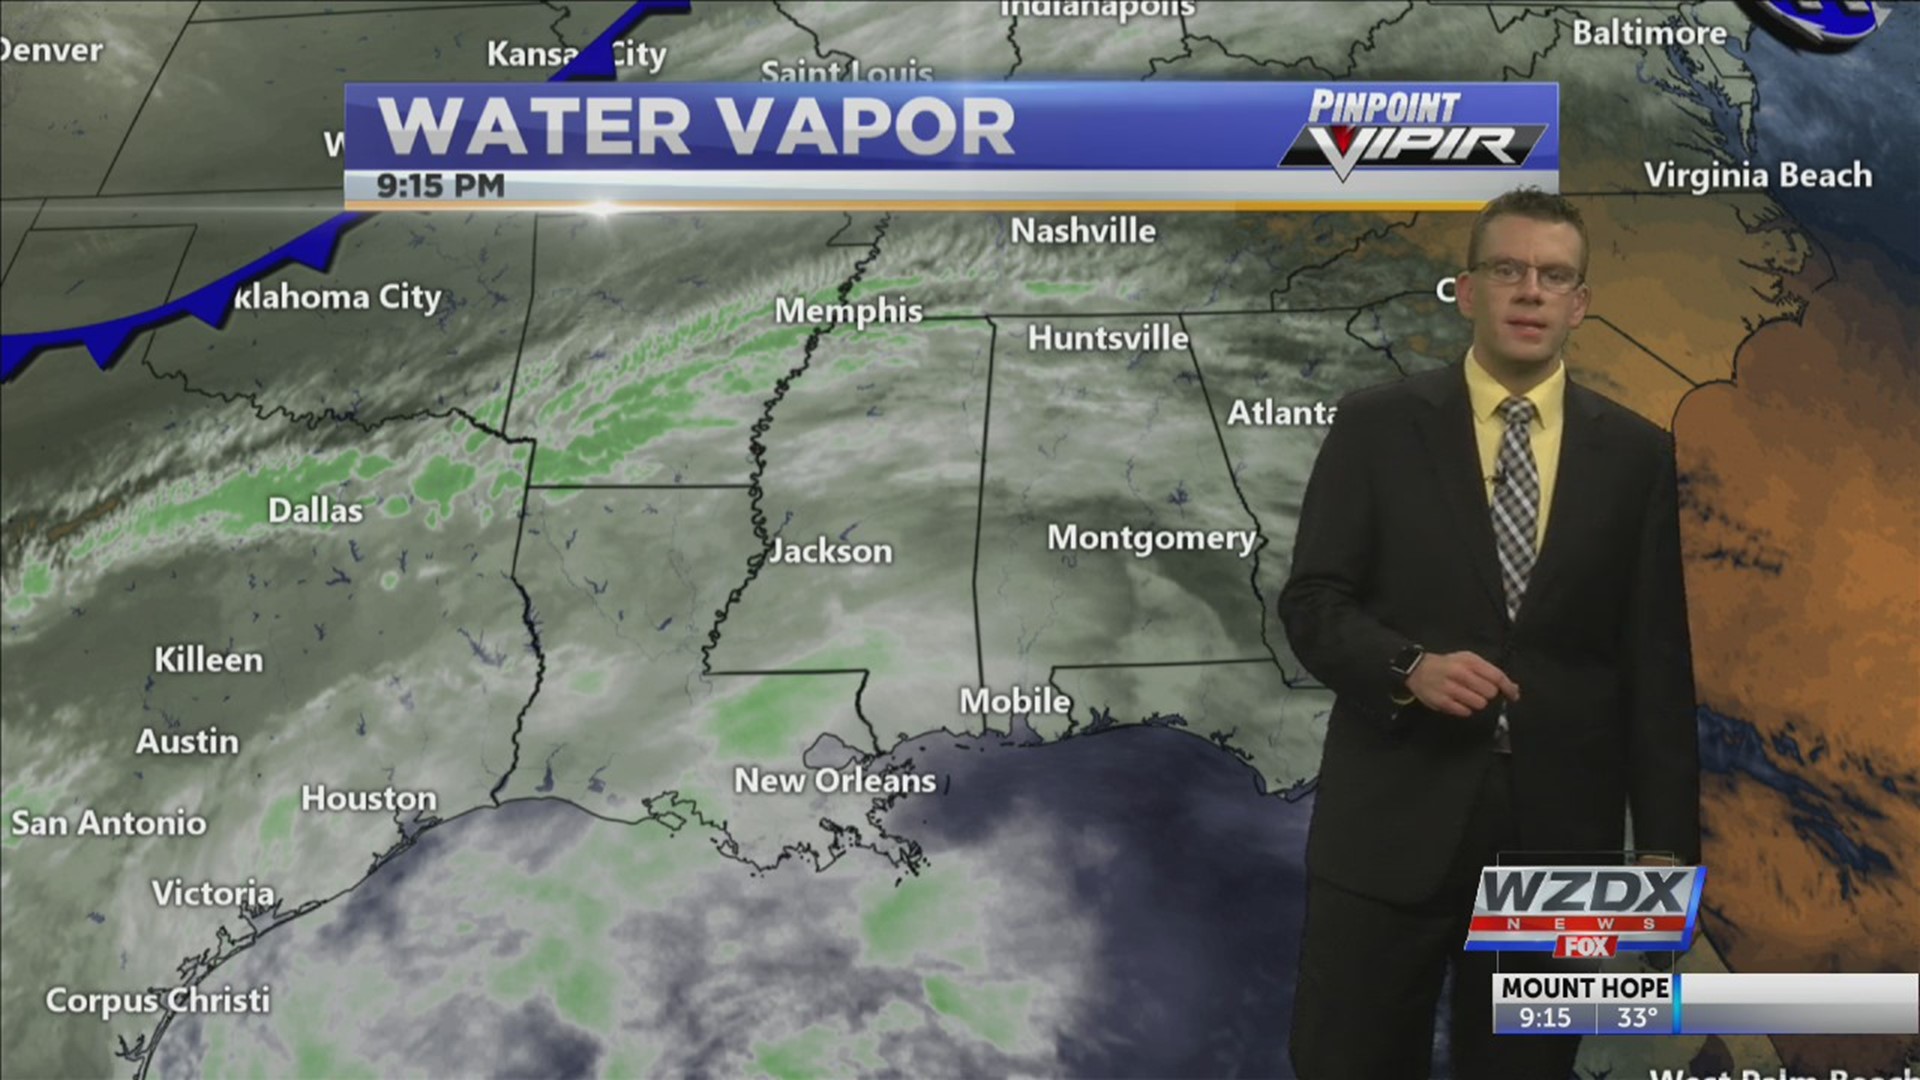 Rain returns to the Tennessee Valley, but not everyone gets wet. Details inside tonight's forecast.